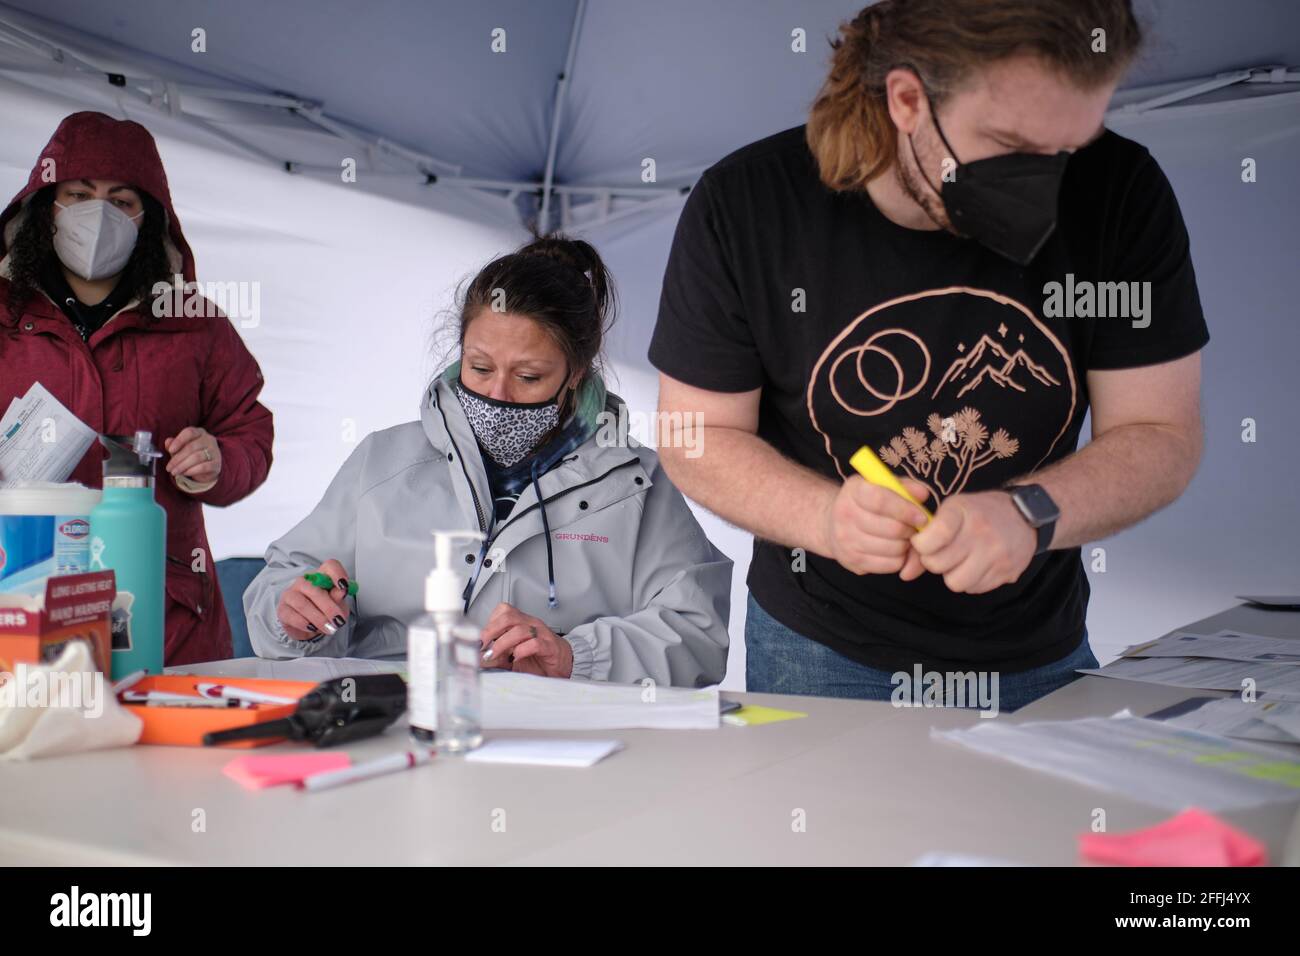 From left, Hannah Glaser, a community health advocate aids Harm Reduction  Outreach Specialist Sharon Bruns and volunteer Alex Lane as they register  people arriving at a temporary COVID-19 vaccine site organized by